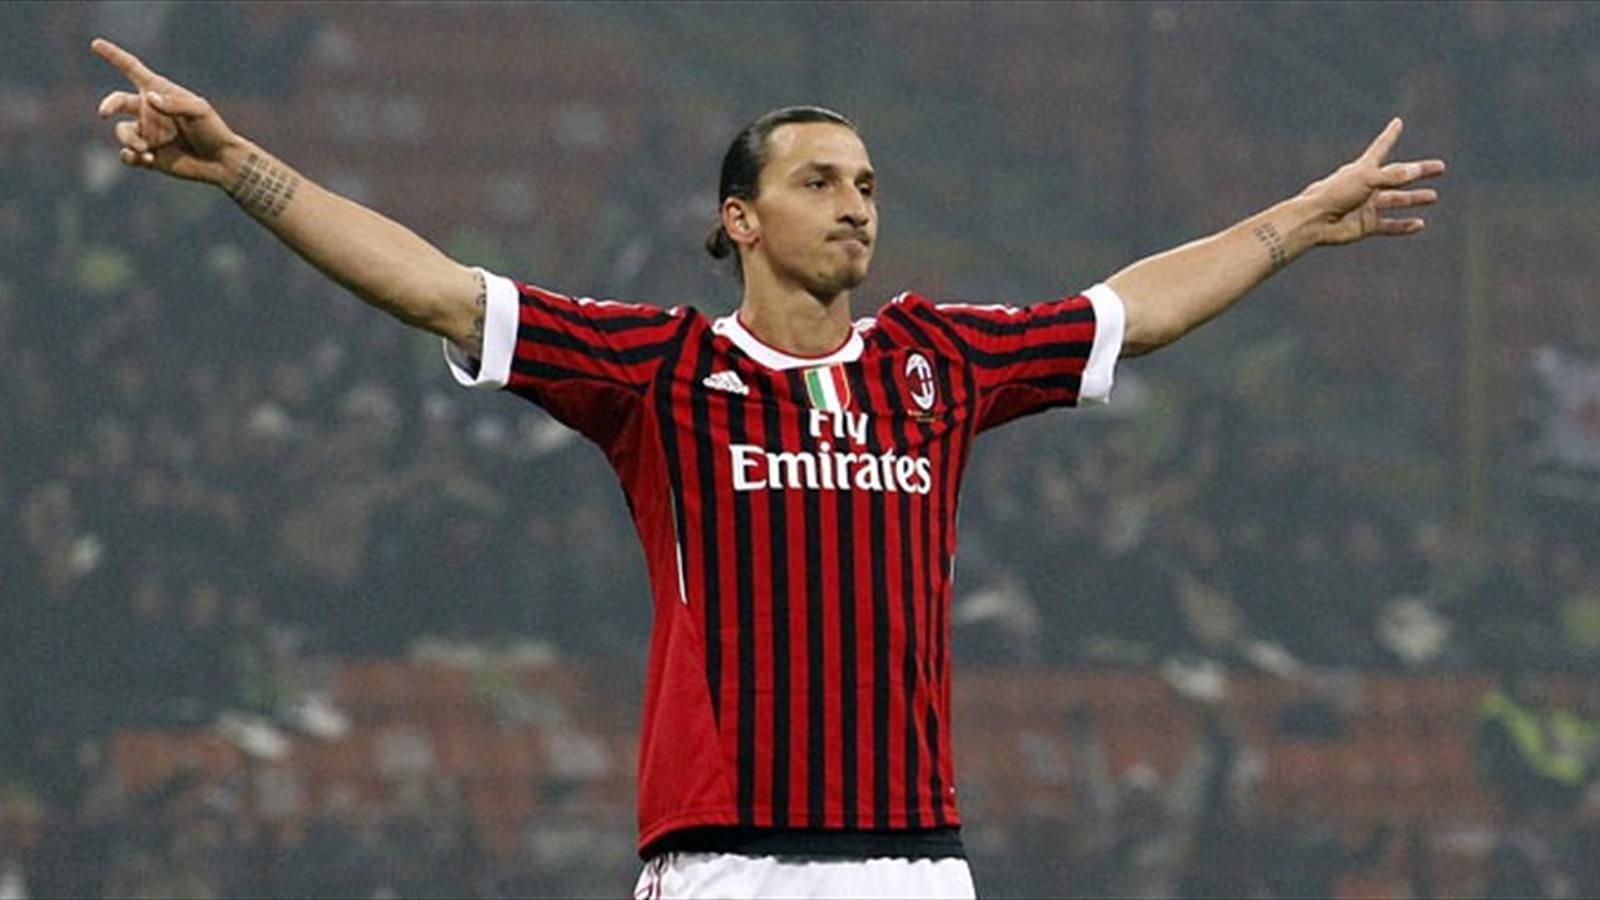 Zlatan Ibrahimovic Talks about How He is Central to Milan’s Functioning and Success